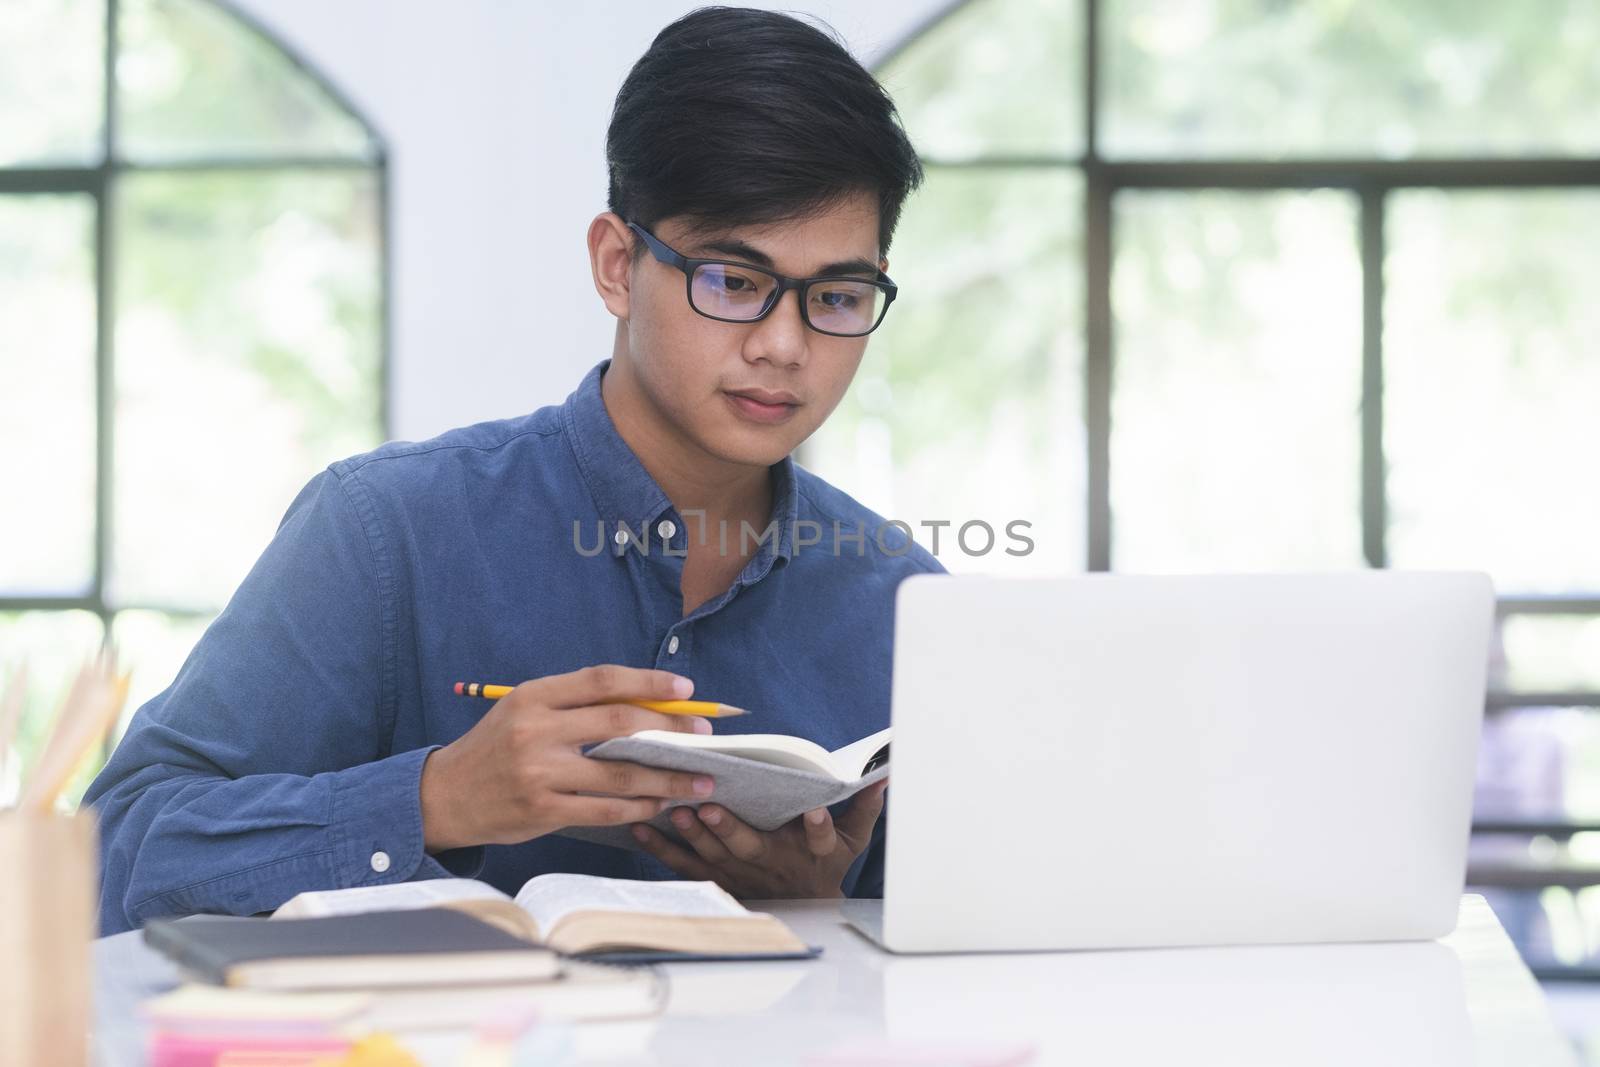 Young collage student using computer and mobile device studying online. Education and online learning.